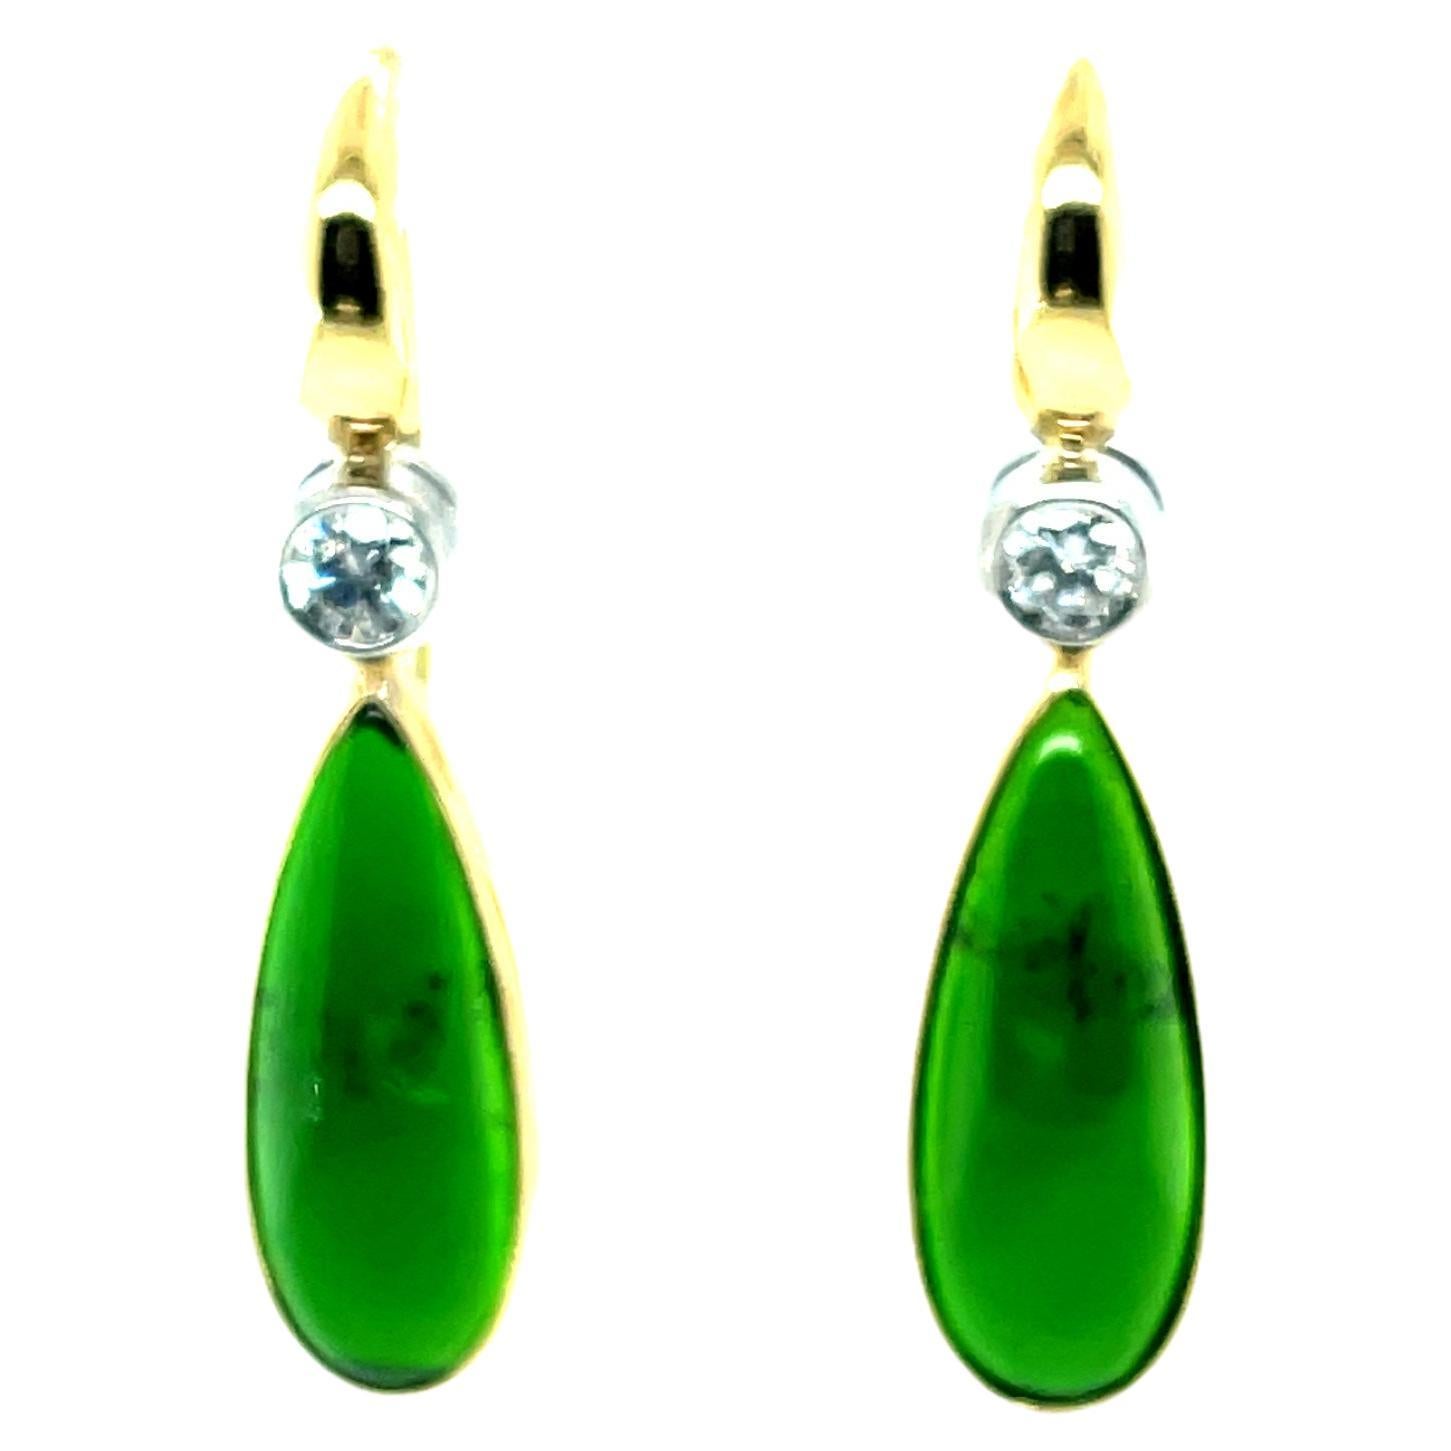 These lovely earrings feature a pair of beautiful chrome diopside cabochons set in 18k yellow gold bezels, dangling below sparkling diamonds set in white gold bezels. Fine quality chrome diopside is a rich, vivid green color and it is luxuriously